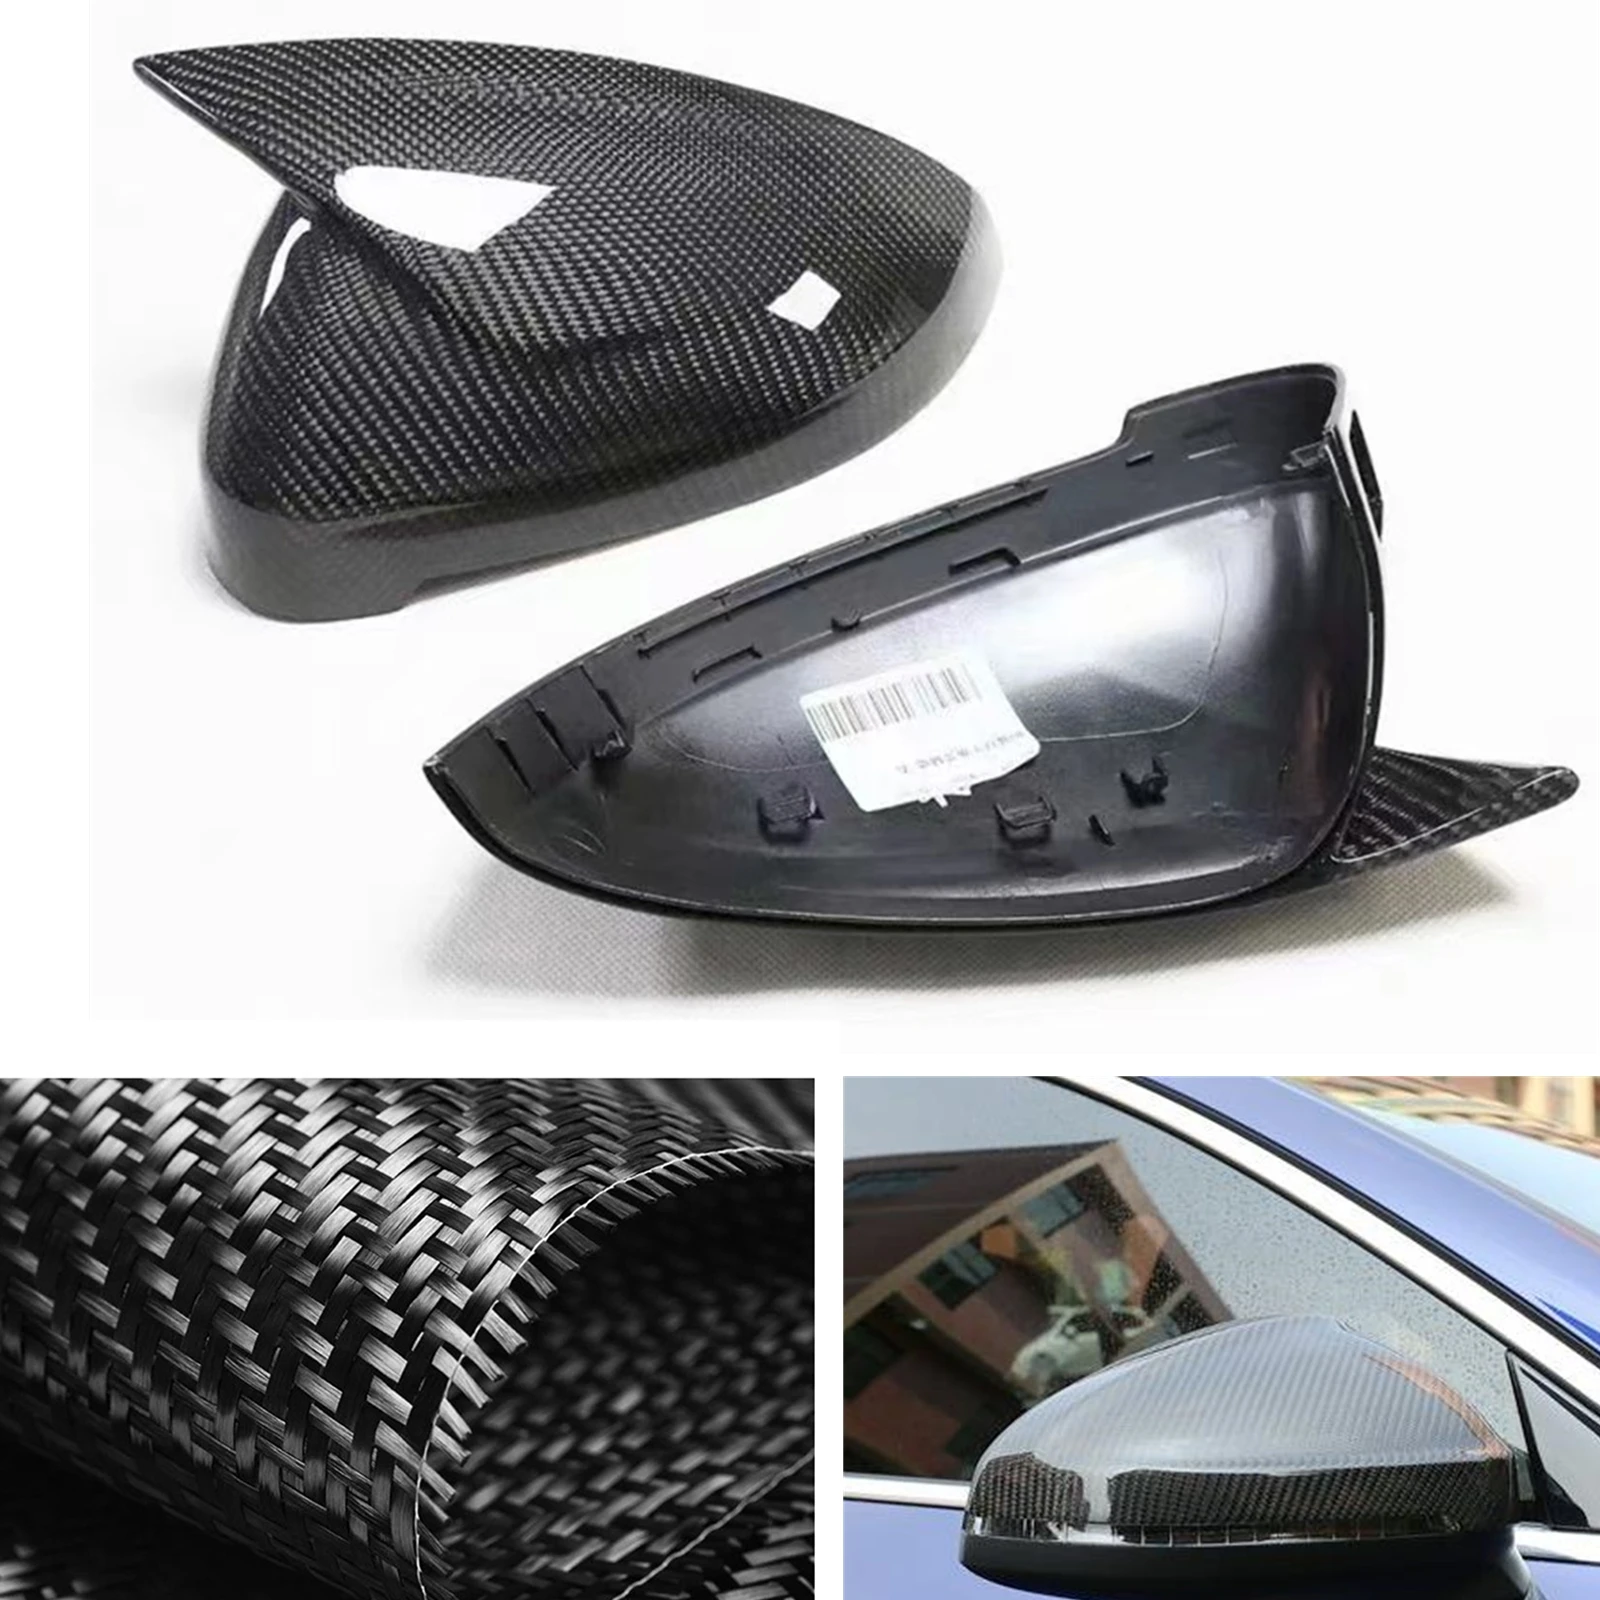 

For Audi RS4 S4 A4 B9 2017-2019 W/ Lane Assist Mirror Cover Real Carbon Fiber Side Rear View Cap Reverse Case Shell Replacement